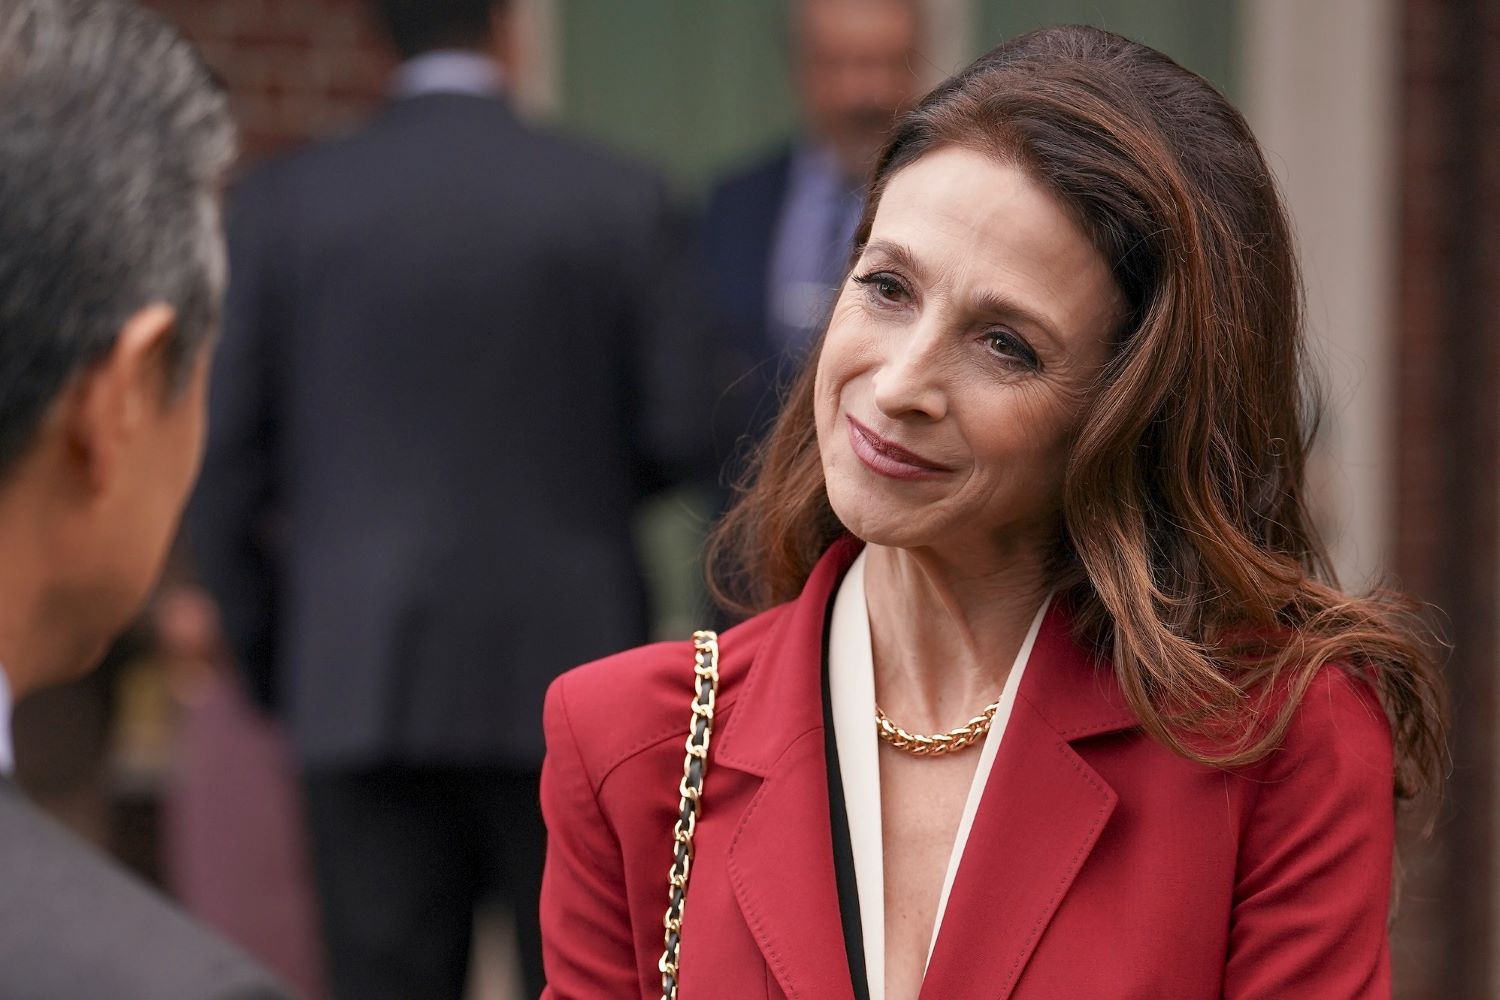 Marin Hinkle, in character as Claire Fox in 'The Company You Keep' Season 1 Episode 4, wears a red suit.